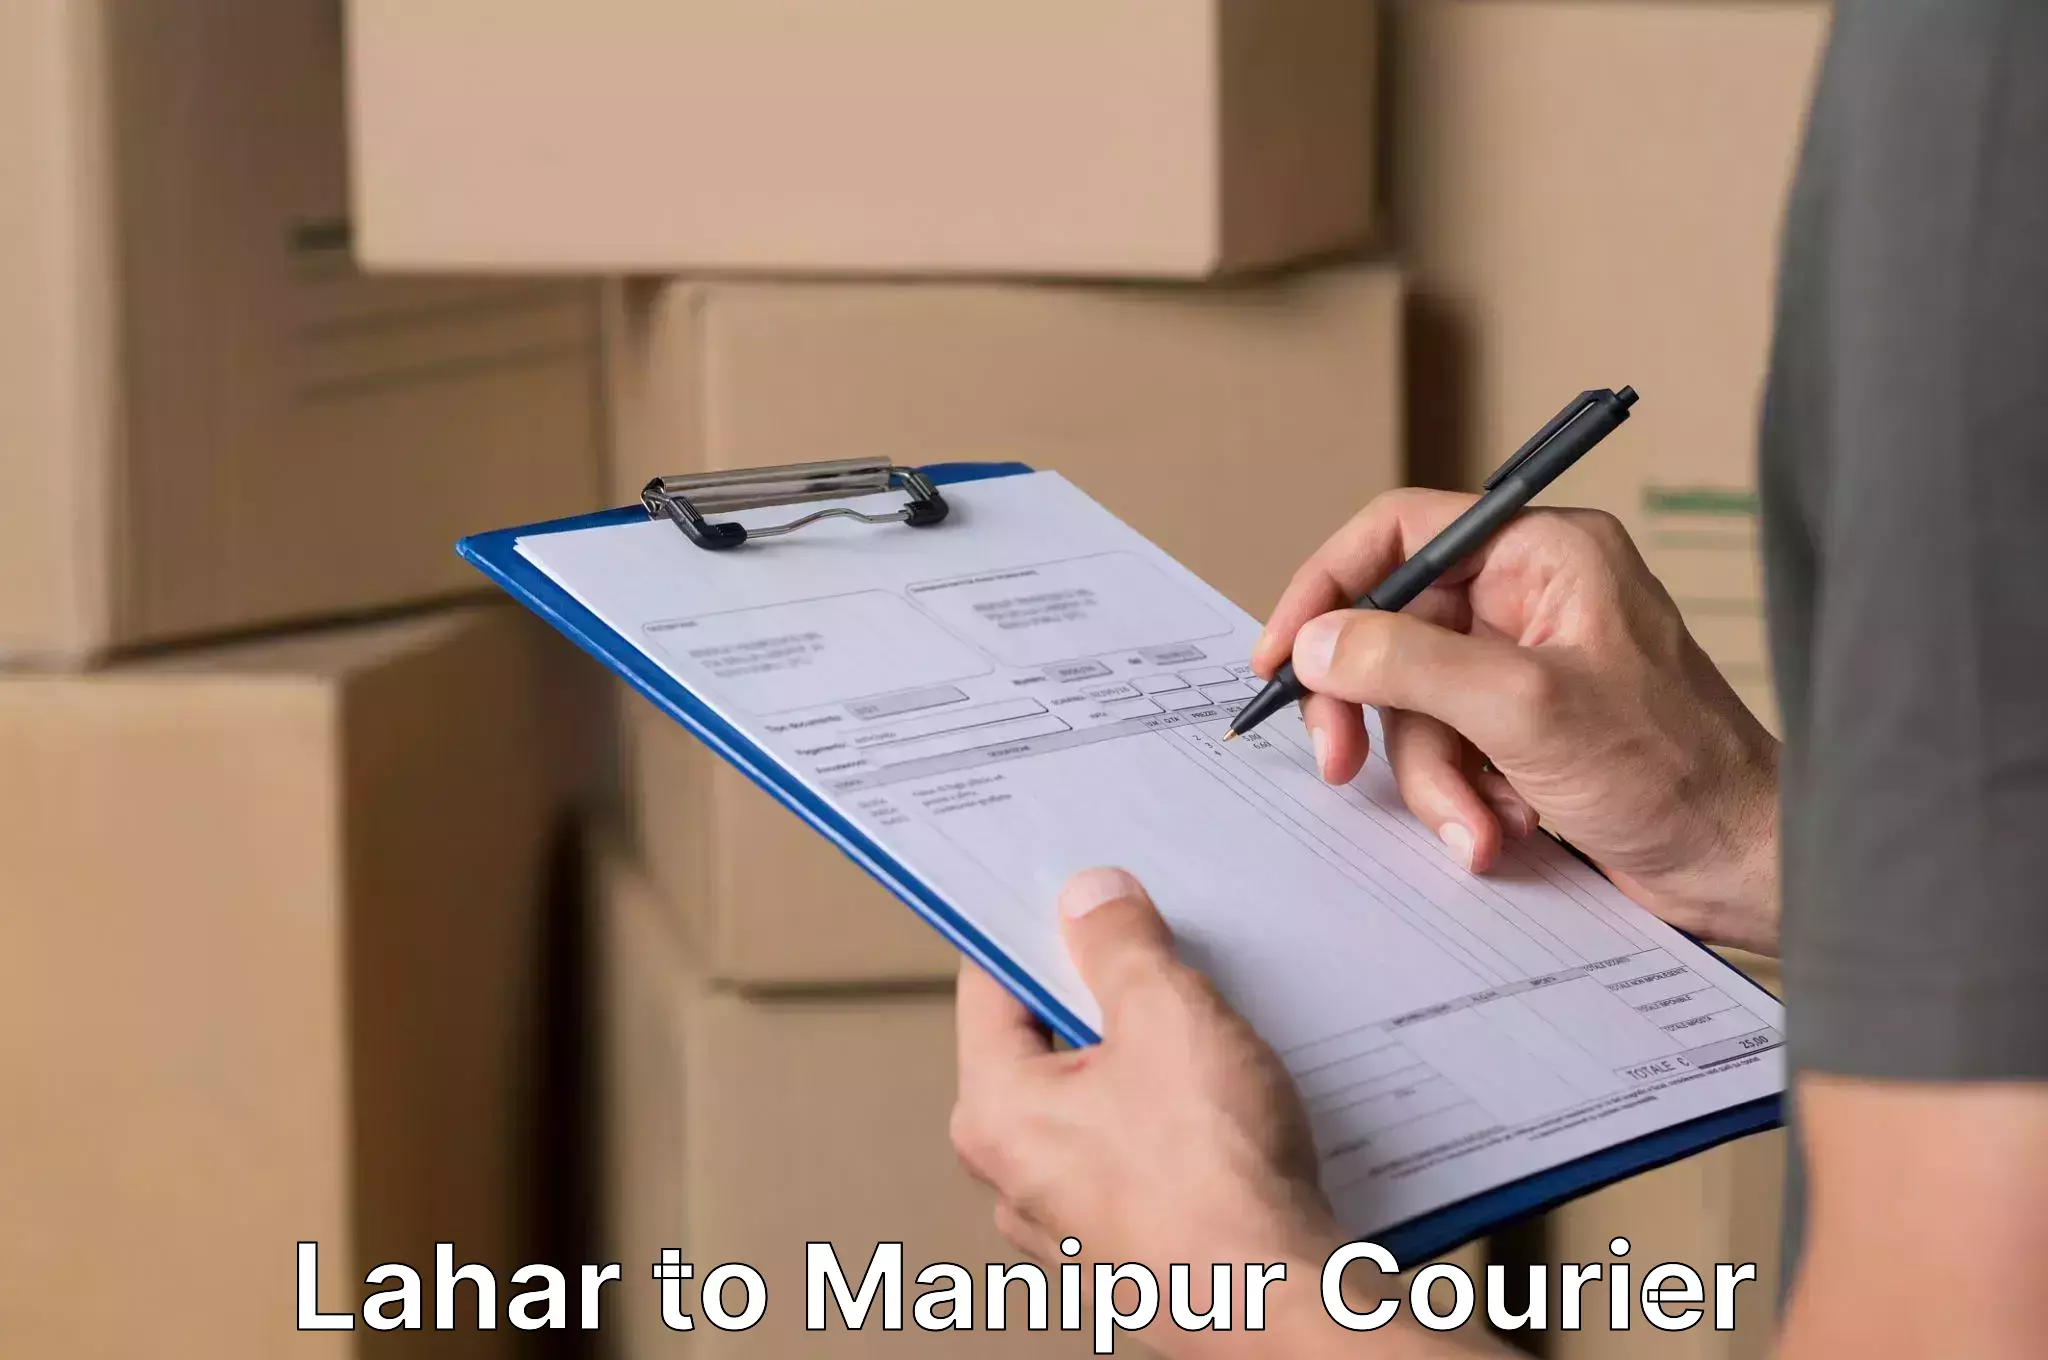 Efficient moving strategies Lahar to Manipur